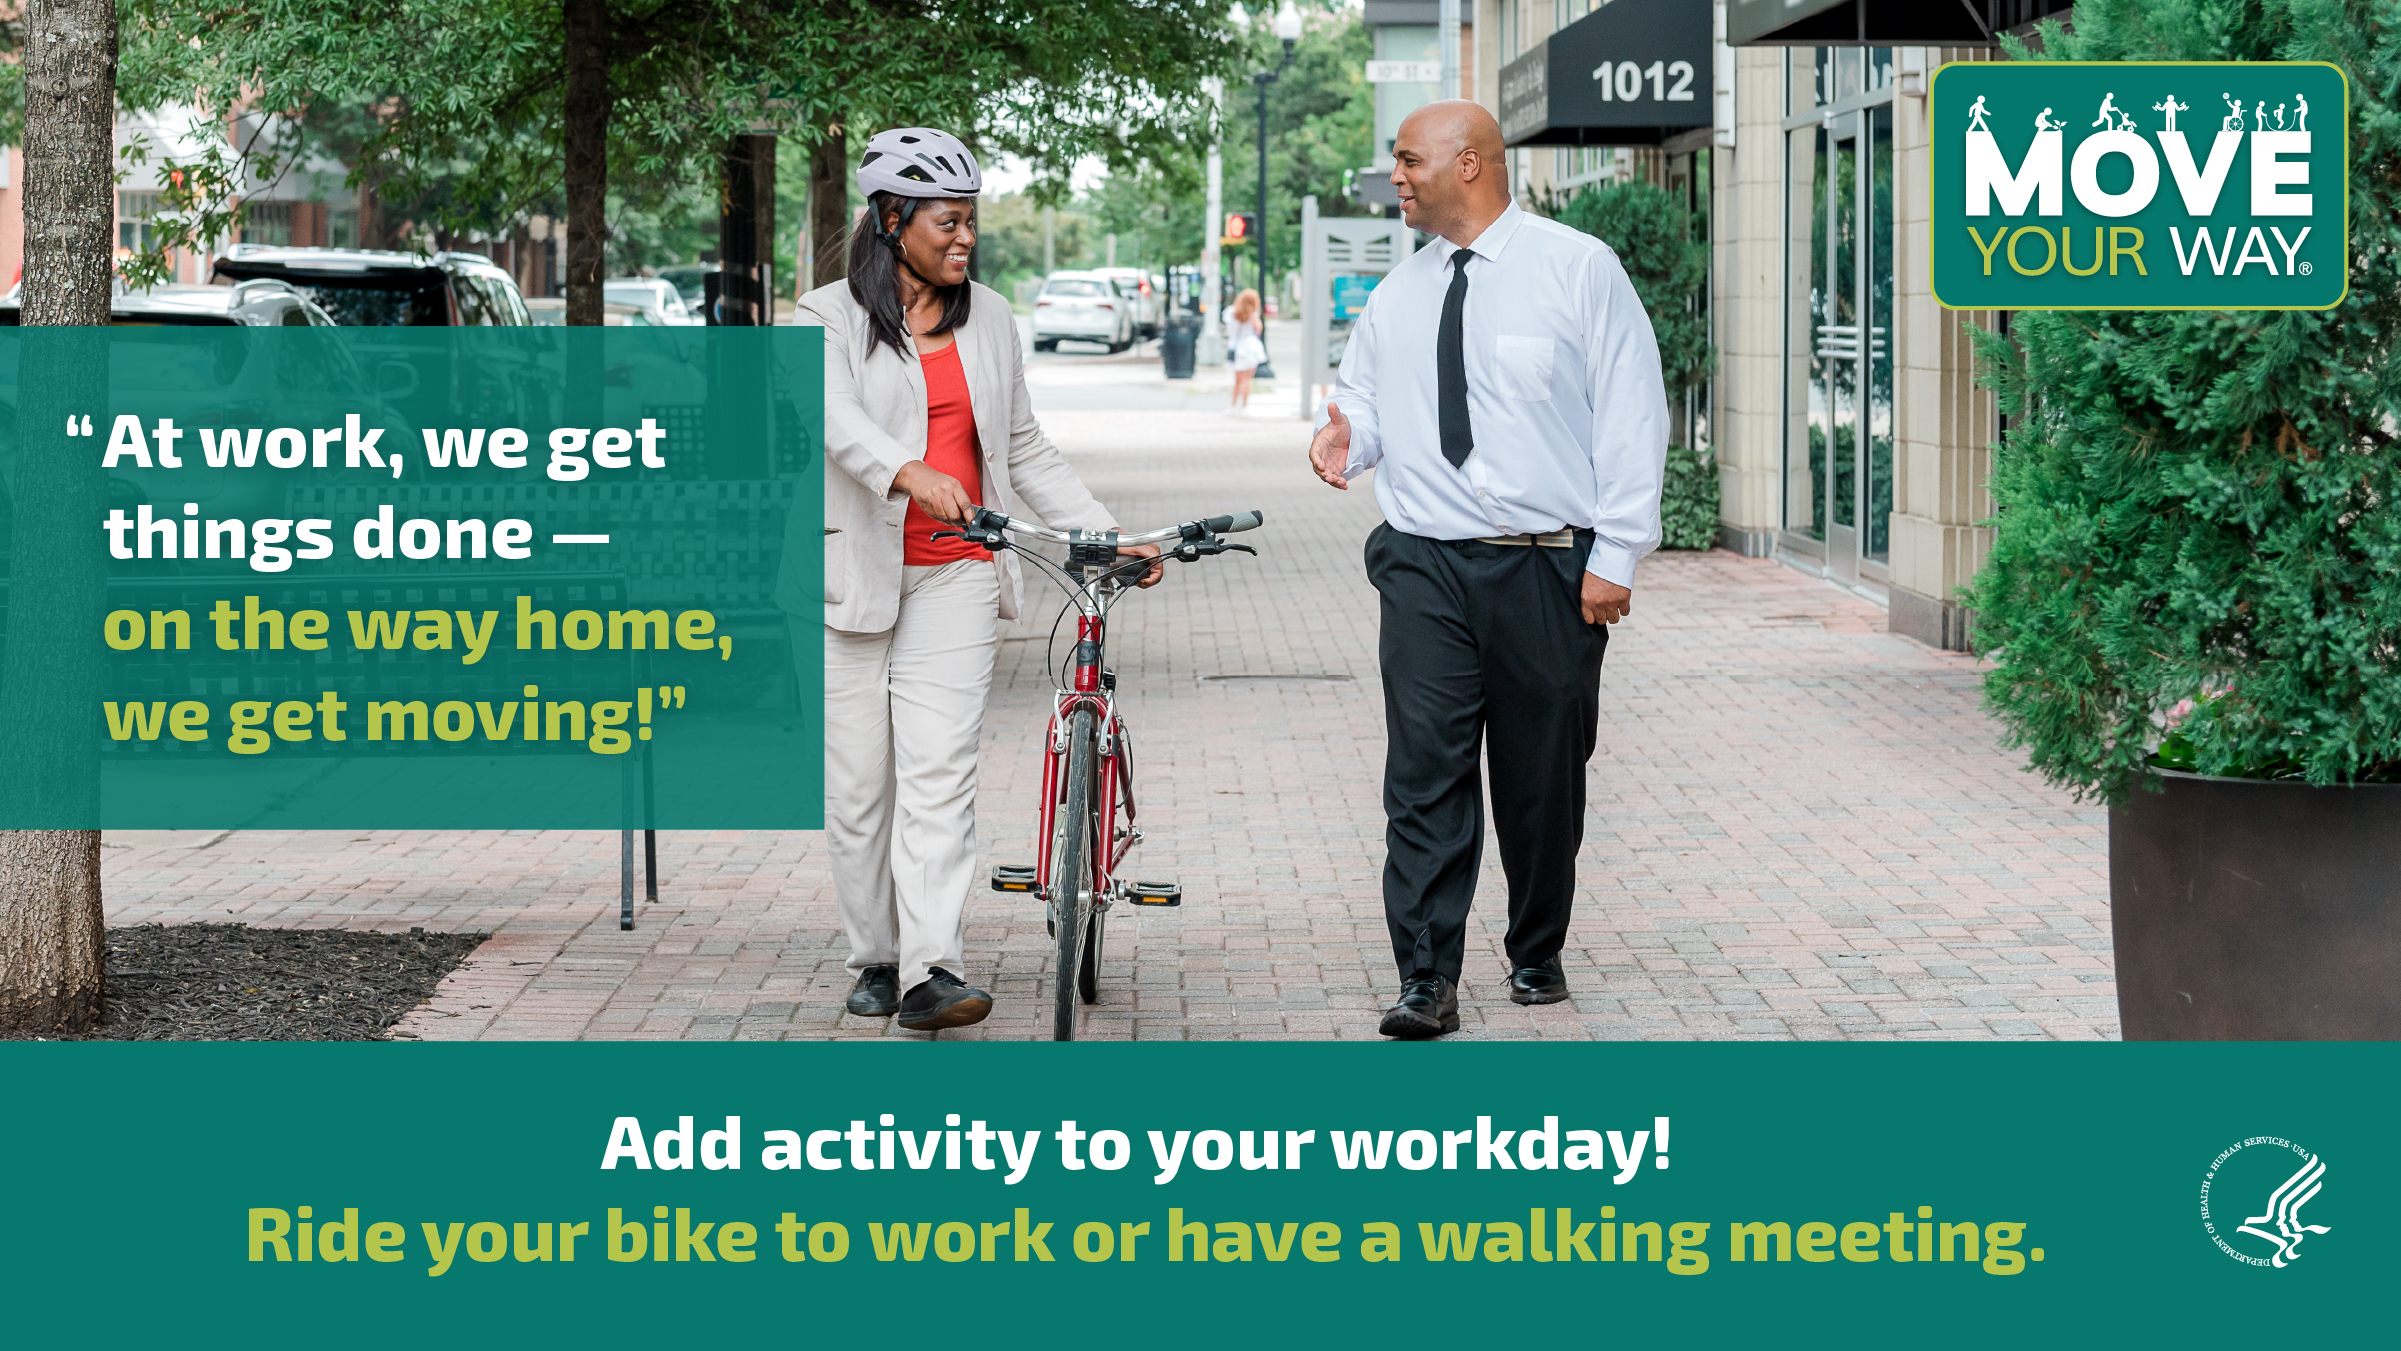 2 working professionals, a Black woman and a Black man, are walking down the street in a downtown area. The woman is wearing a helmet and pushing a bike. They’re talking and smiling. The image also shows the Move Your Way logo and the following messages: "At work, we get things done — on the way home, we get moving!" and "Add activity to your workday! Ride your bike to work or have a walking meeting."